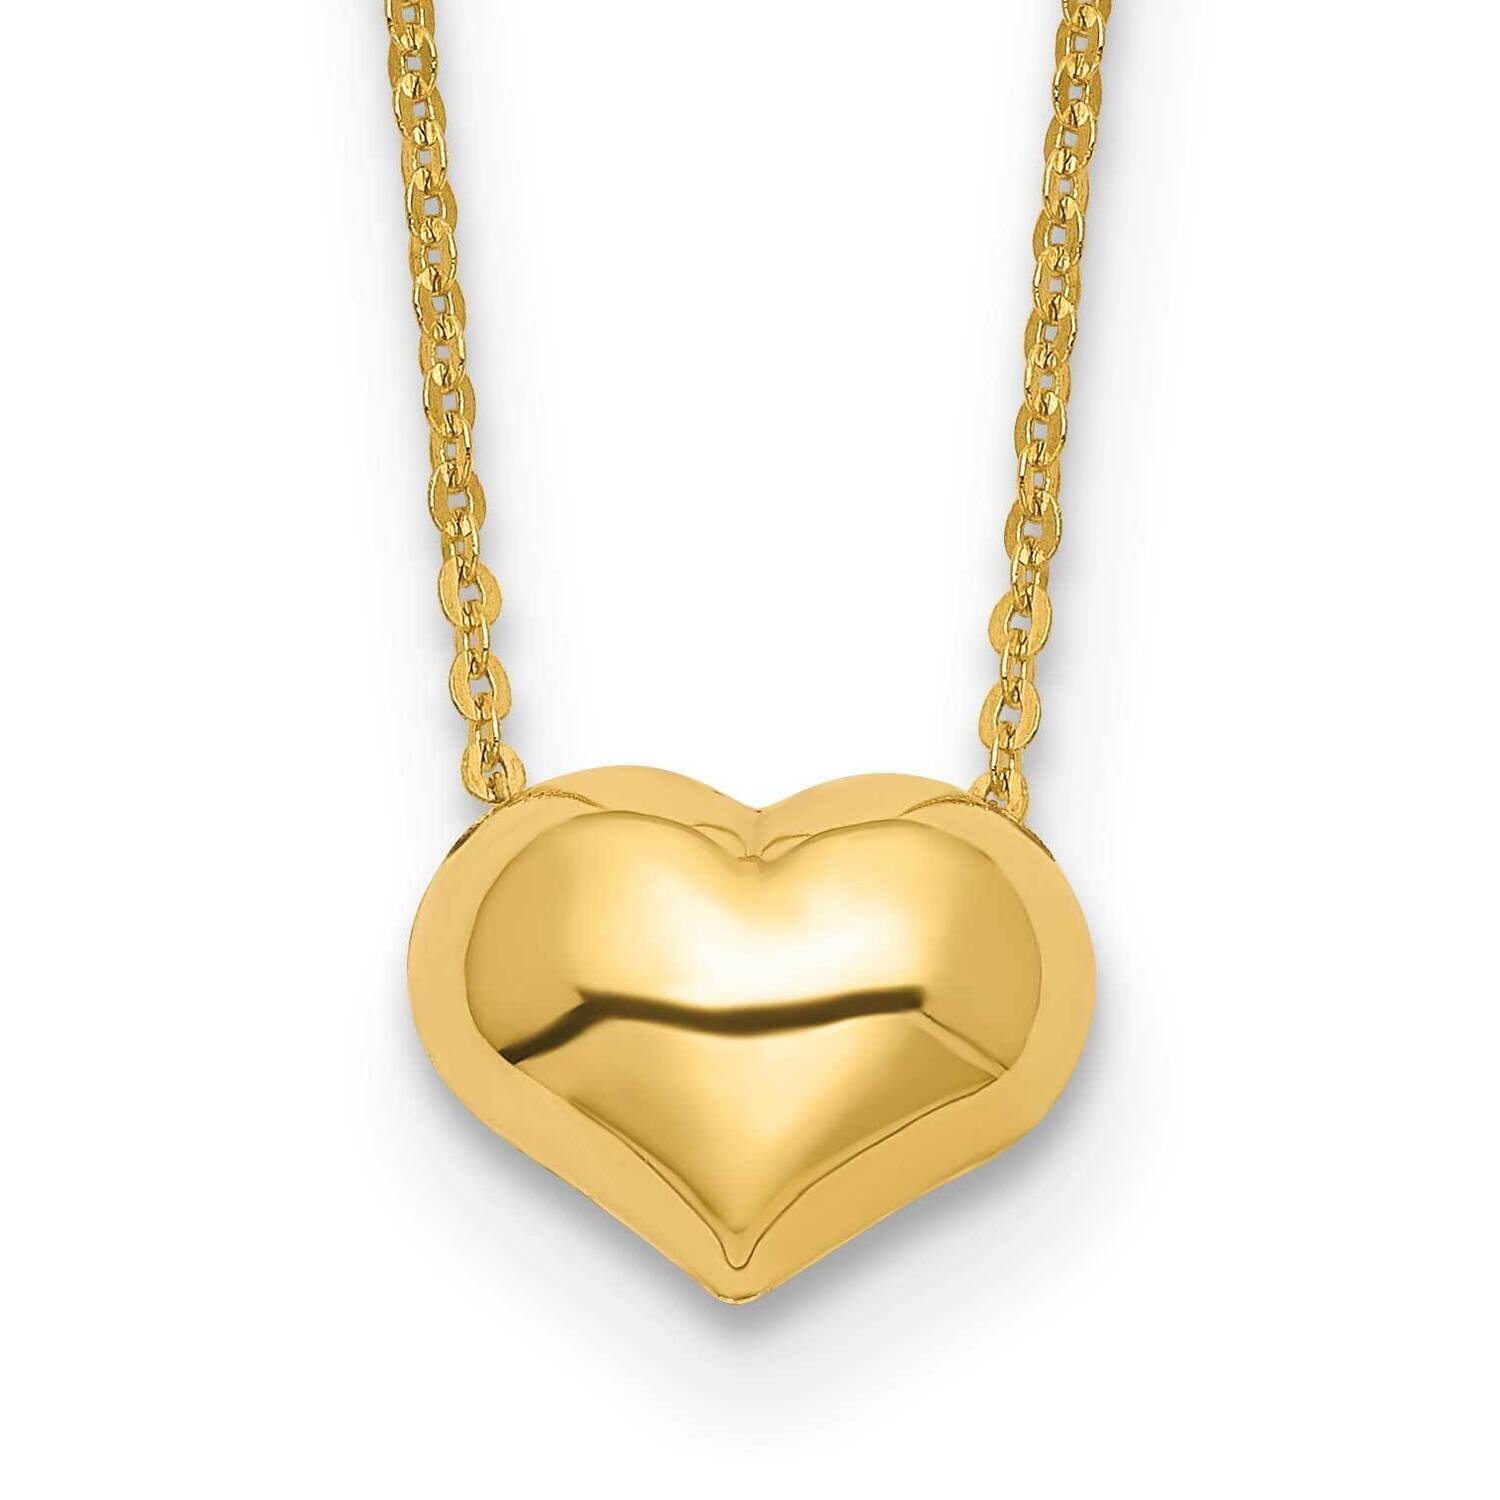 Puffed Heart 16.5 Inch Necklace 14k Gold Polished SF2871-16.5